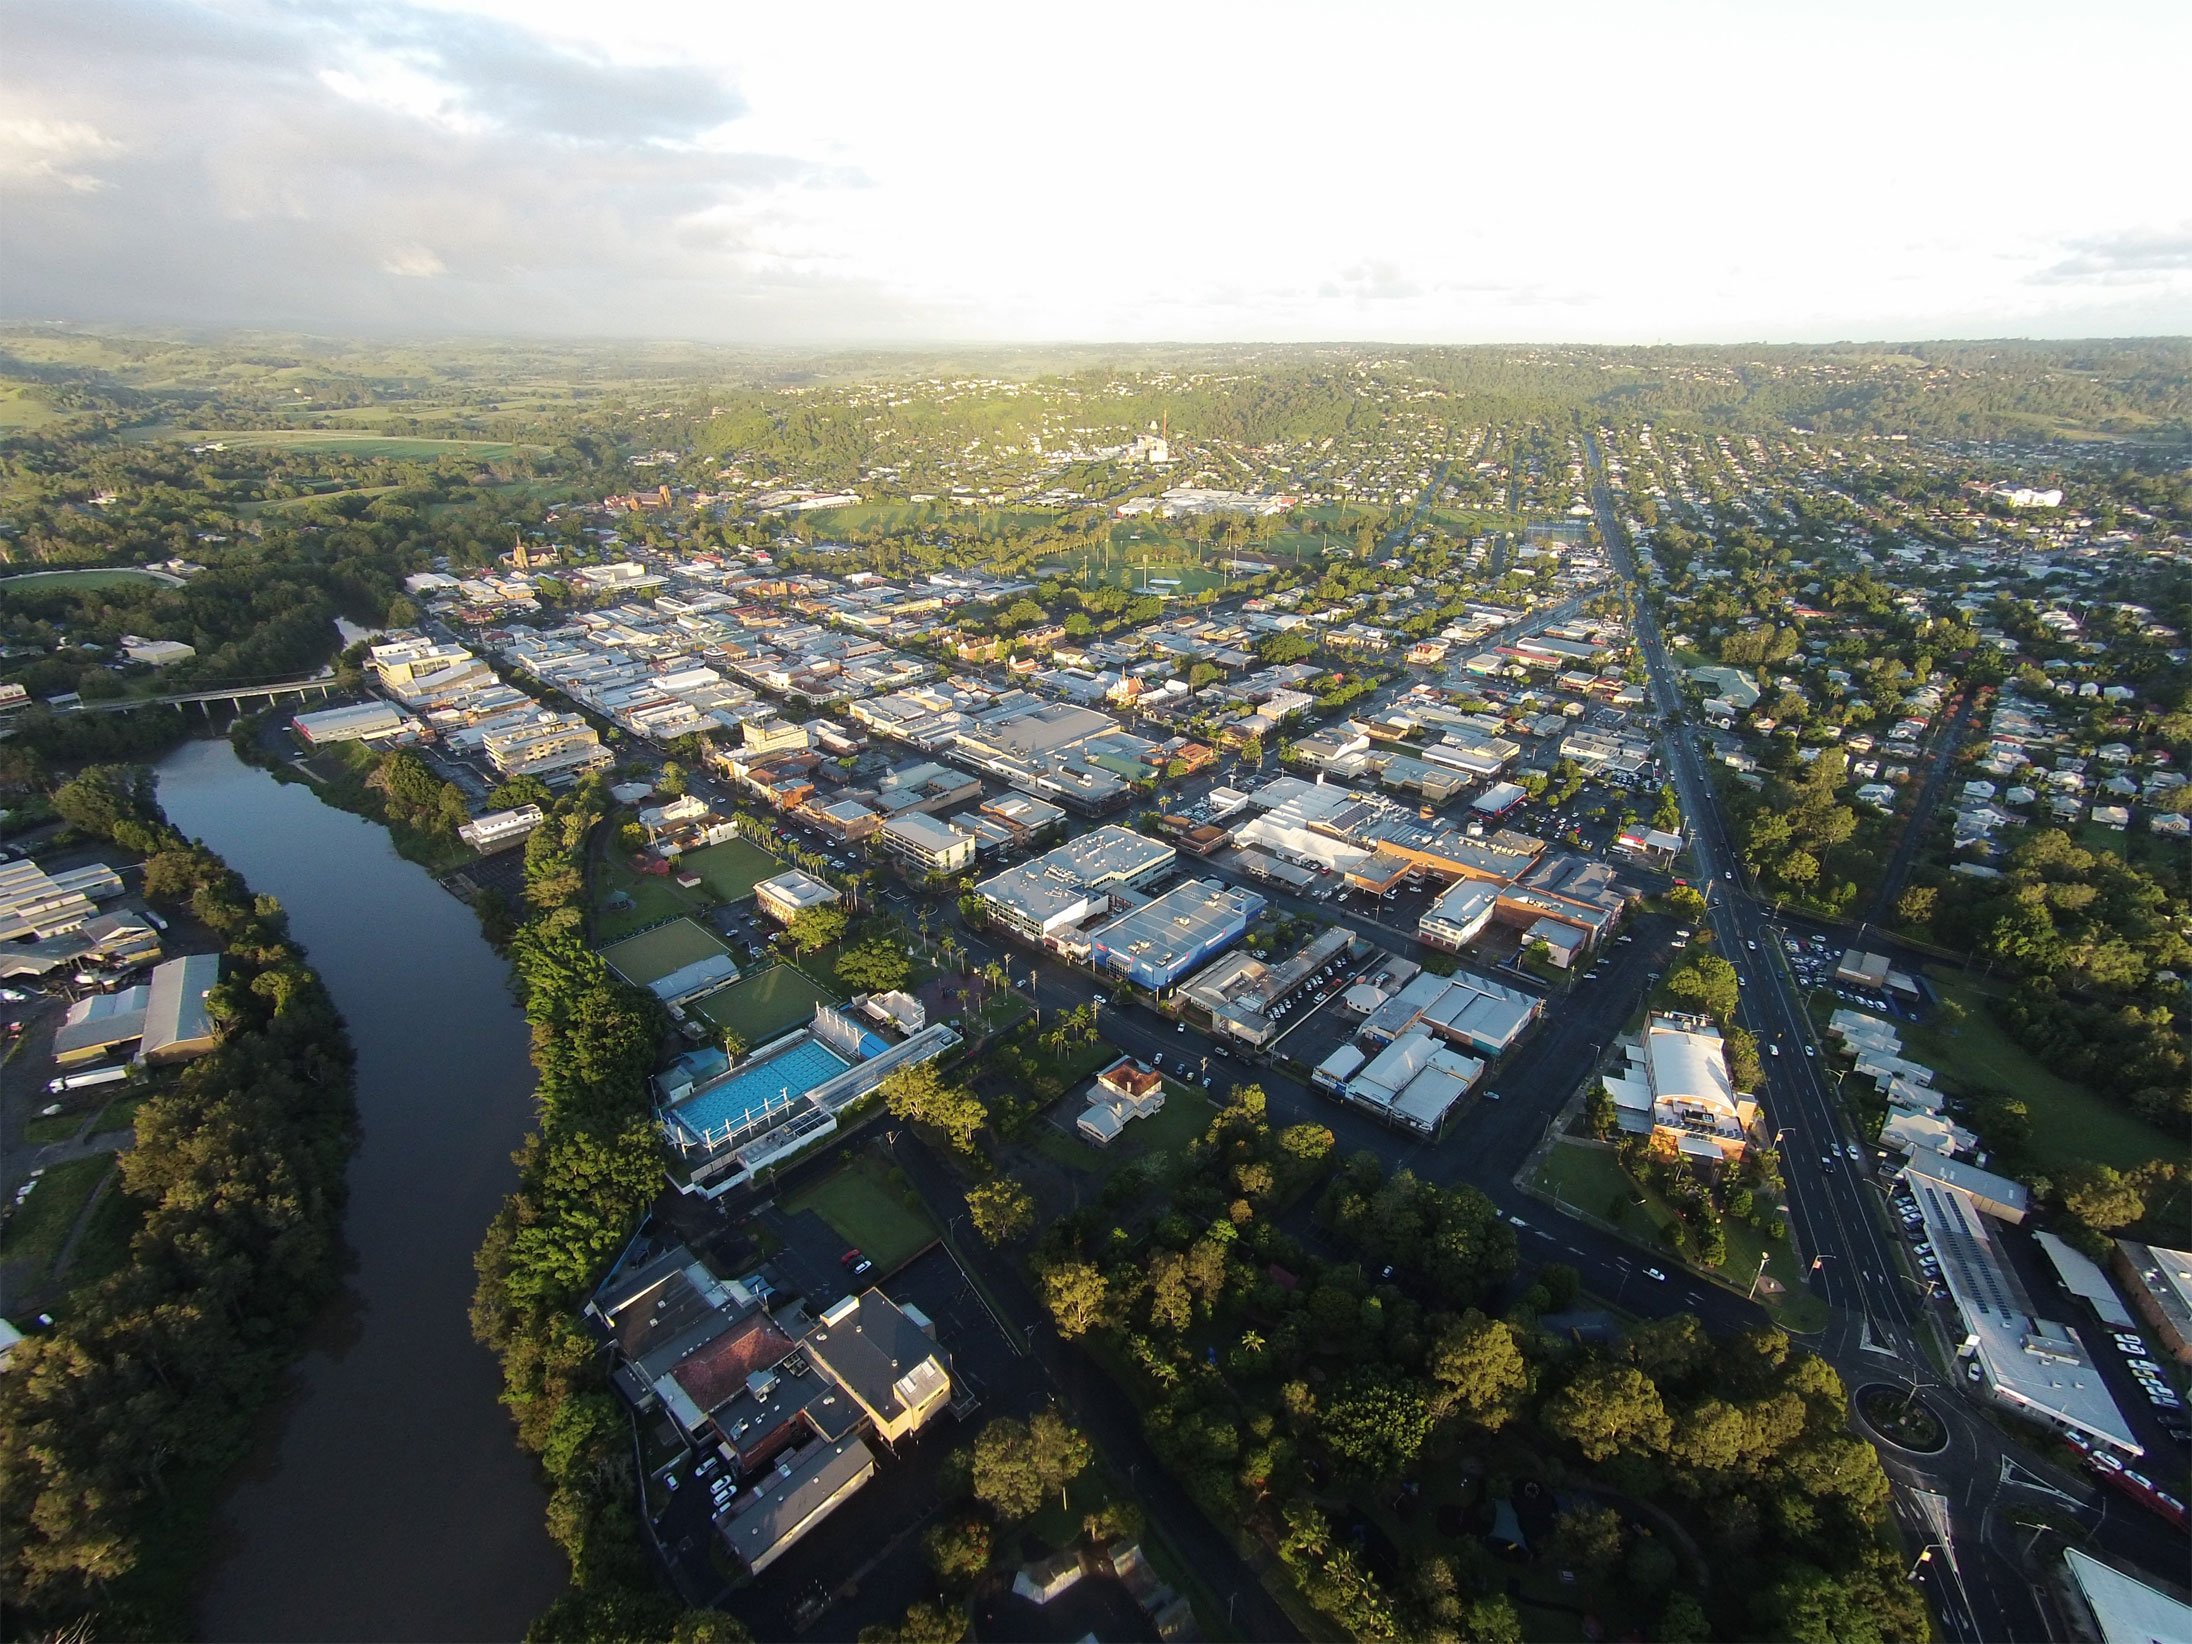 Academic Jobs Lismore, Australia - Cityscape overlooking lush greenery and buildings